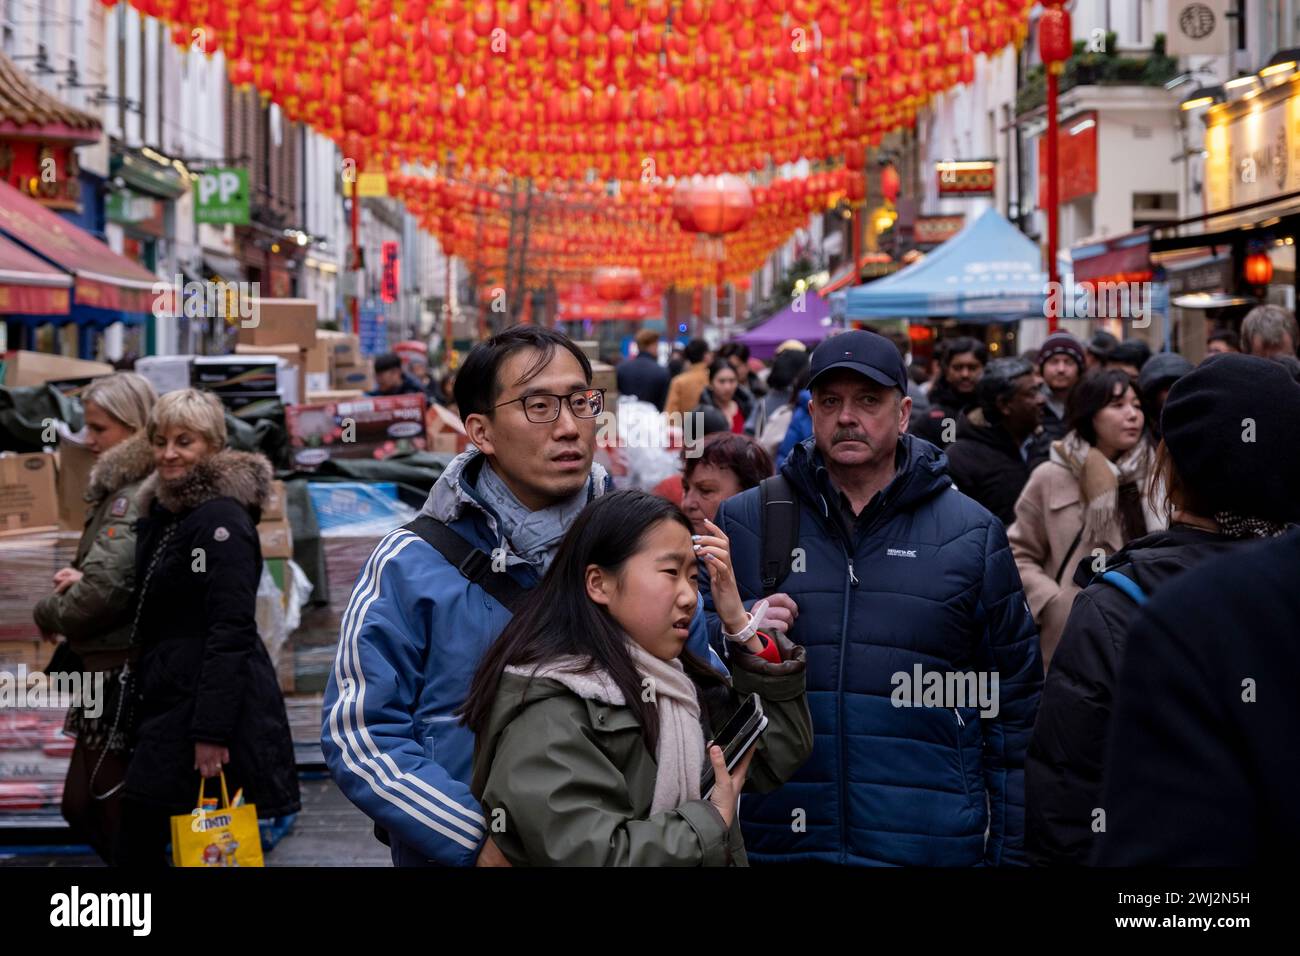 Street scene on Gerrard Street in Chinatown as newly installed red lanterns hang above in preparation for the Chinese Lunar New Year celebrations on 9th February 2024 in London, United Kingdom. Chinatown is an ethnic enclave bordering Soho and currently occupies the area in and around Gerrard Street. It contains a number of Chinese restaurants, bakeries, supermarkets, souvenir shops, and other Chinese-run businesses. Stock Photo